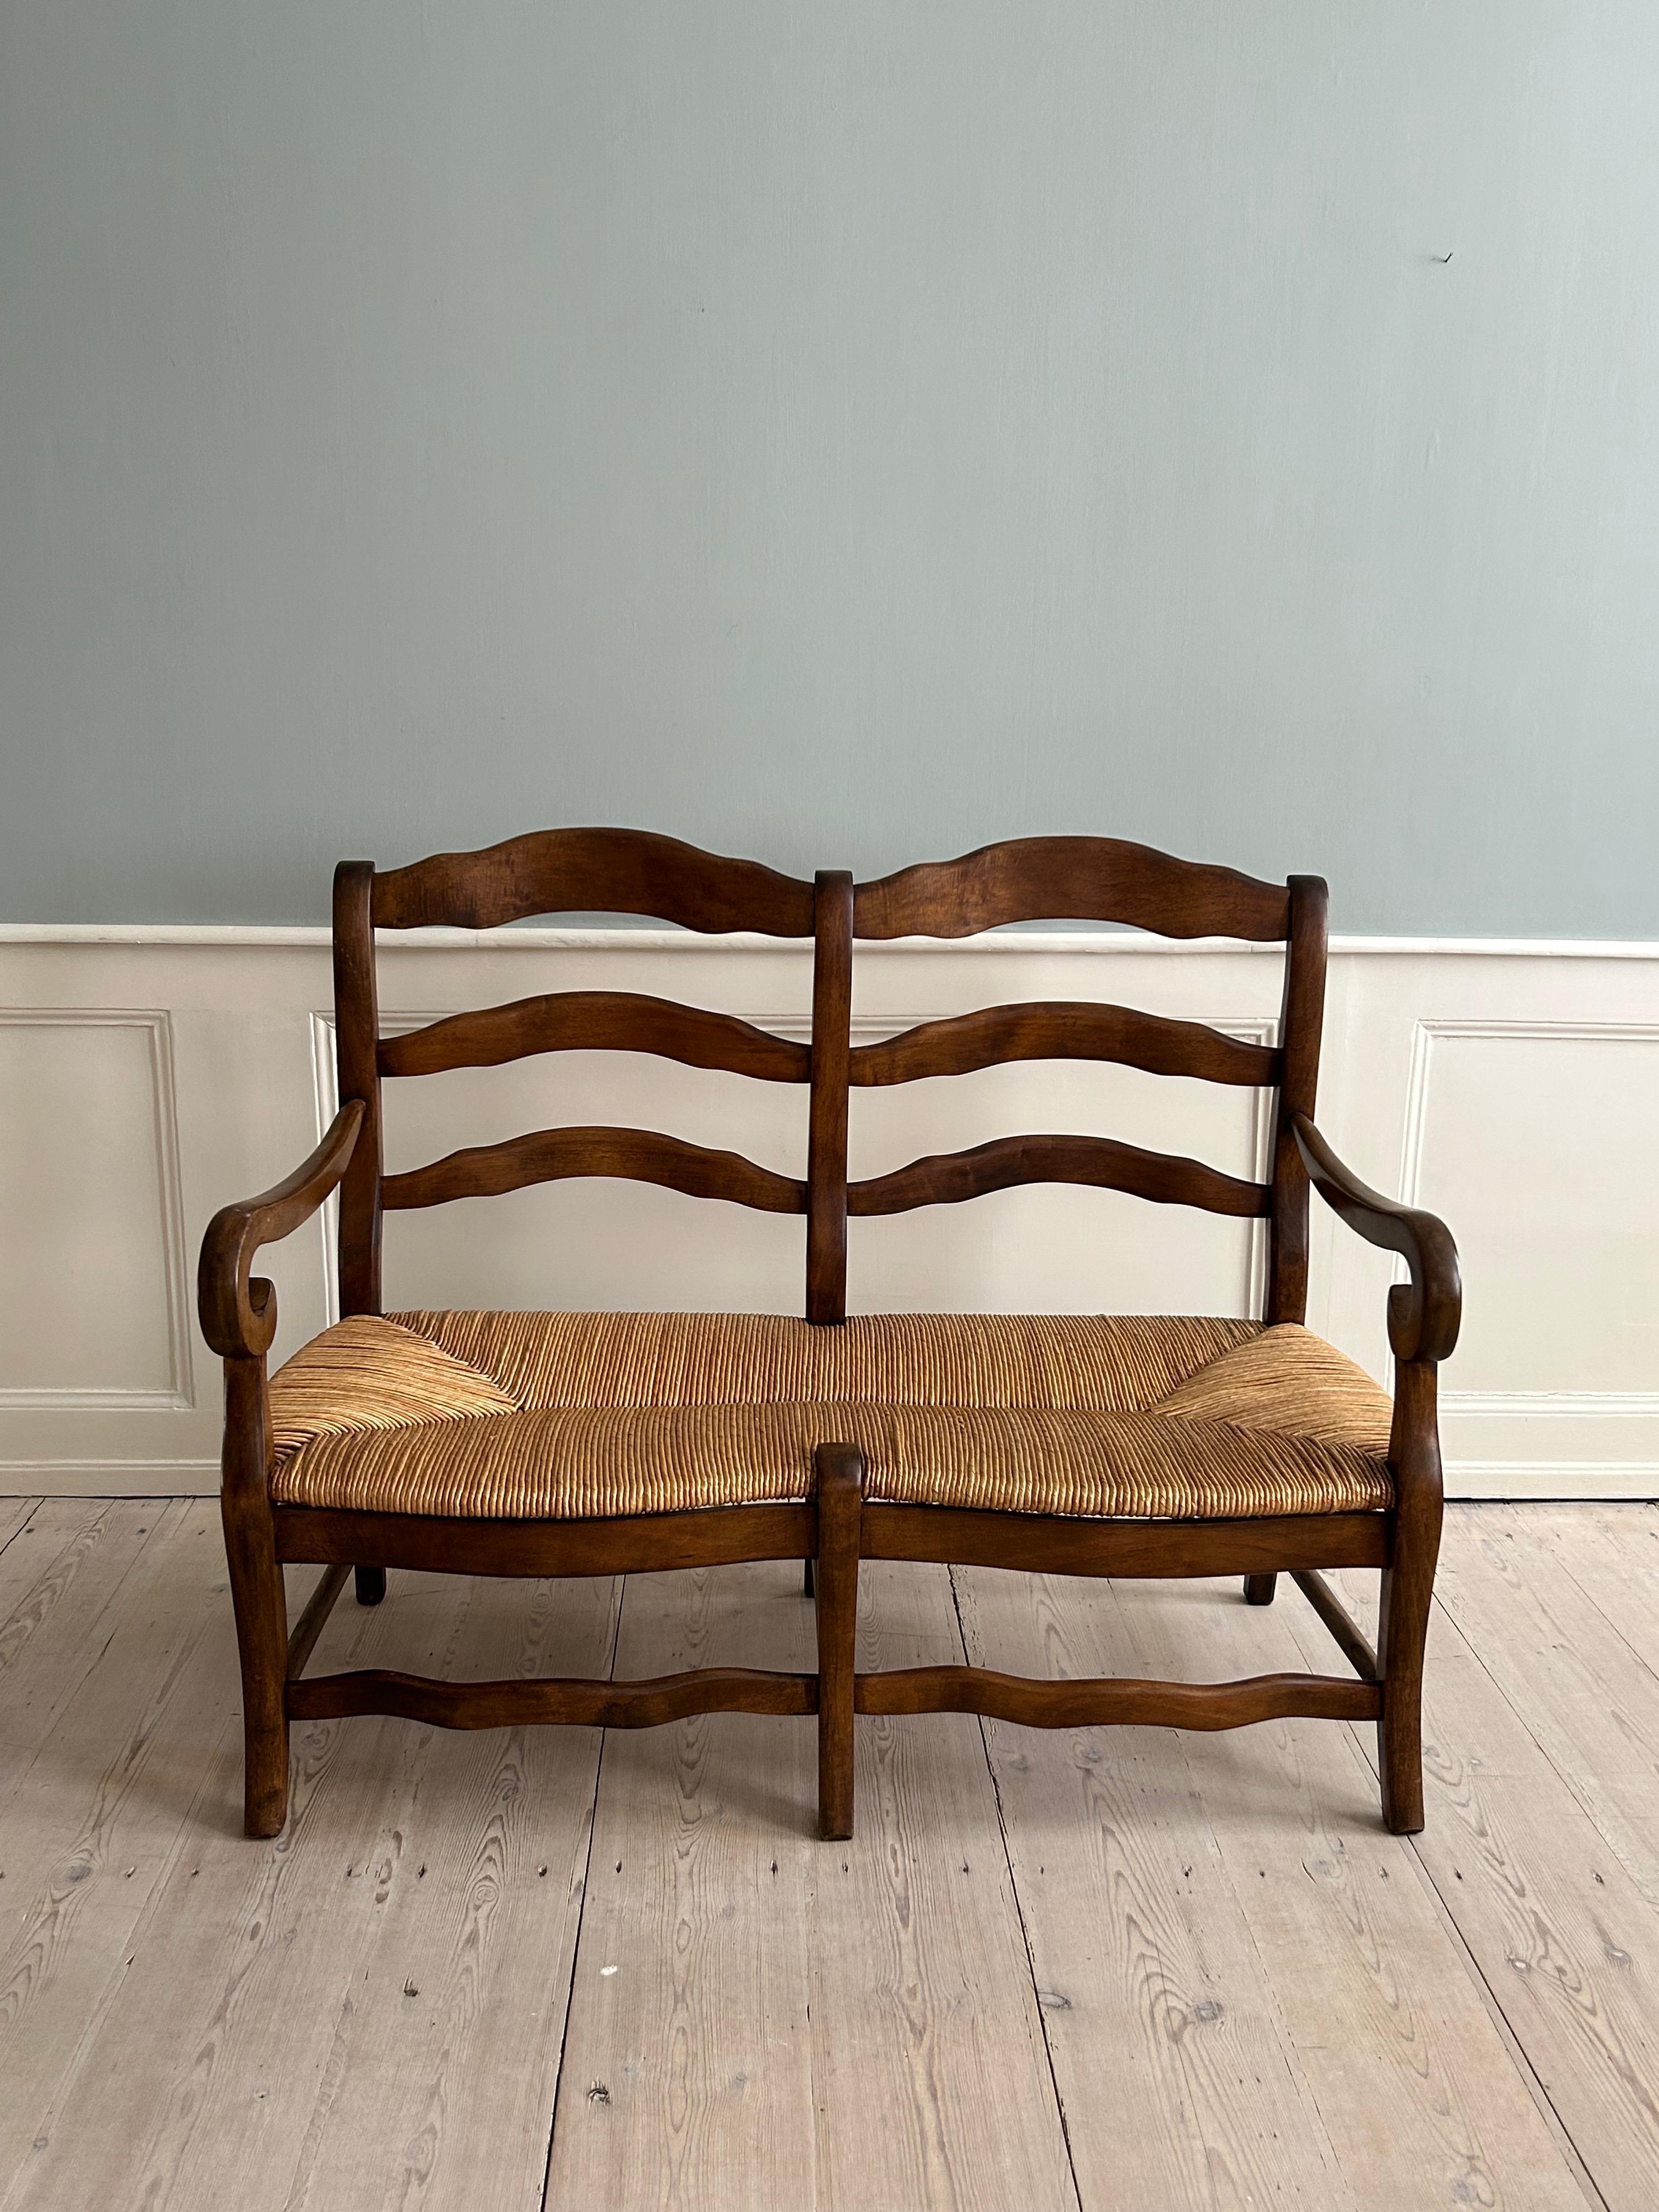 Hand-Crafted Antique Provence Bench in Curved Wood with Rush Seat, France, 19th Century For Sale